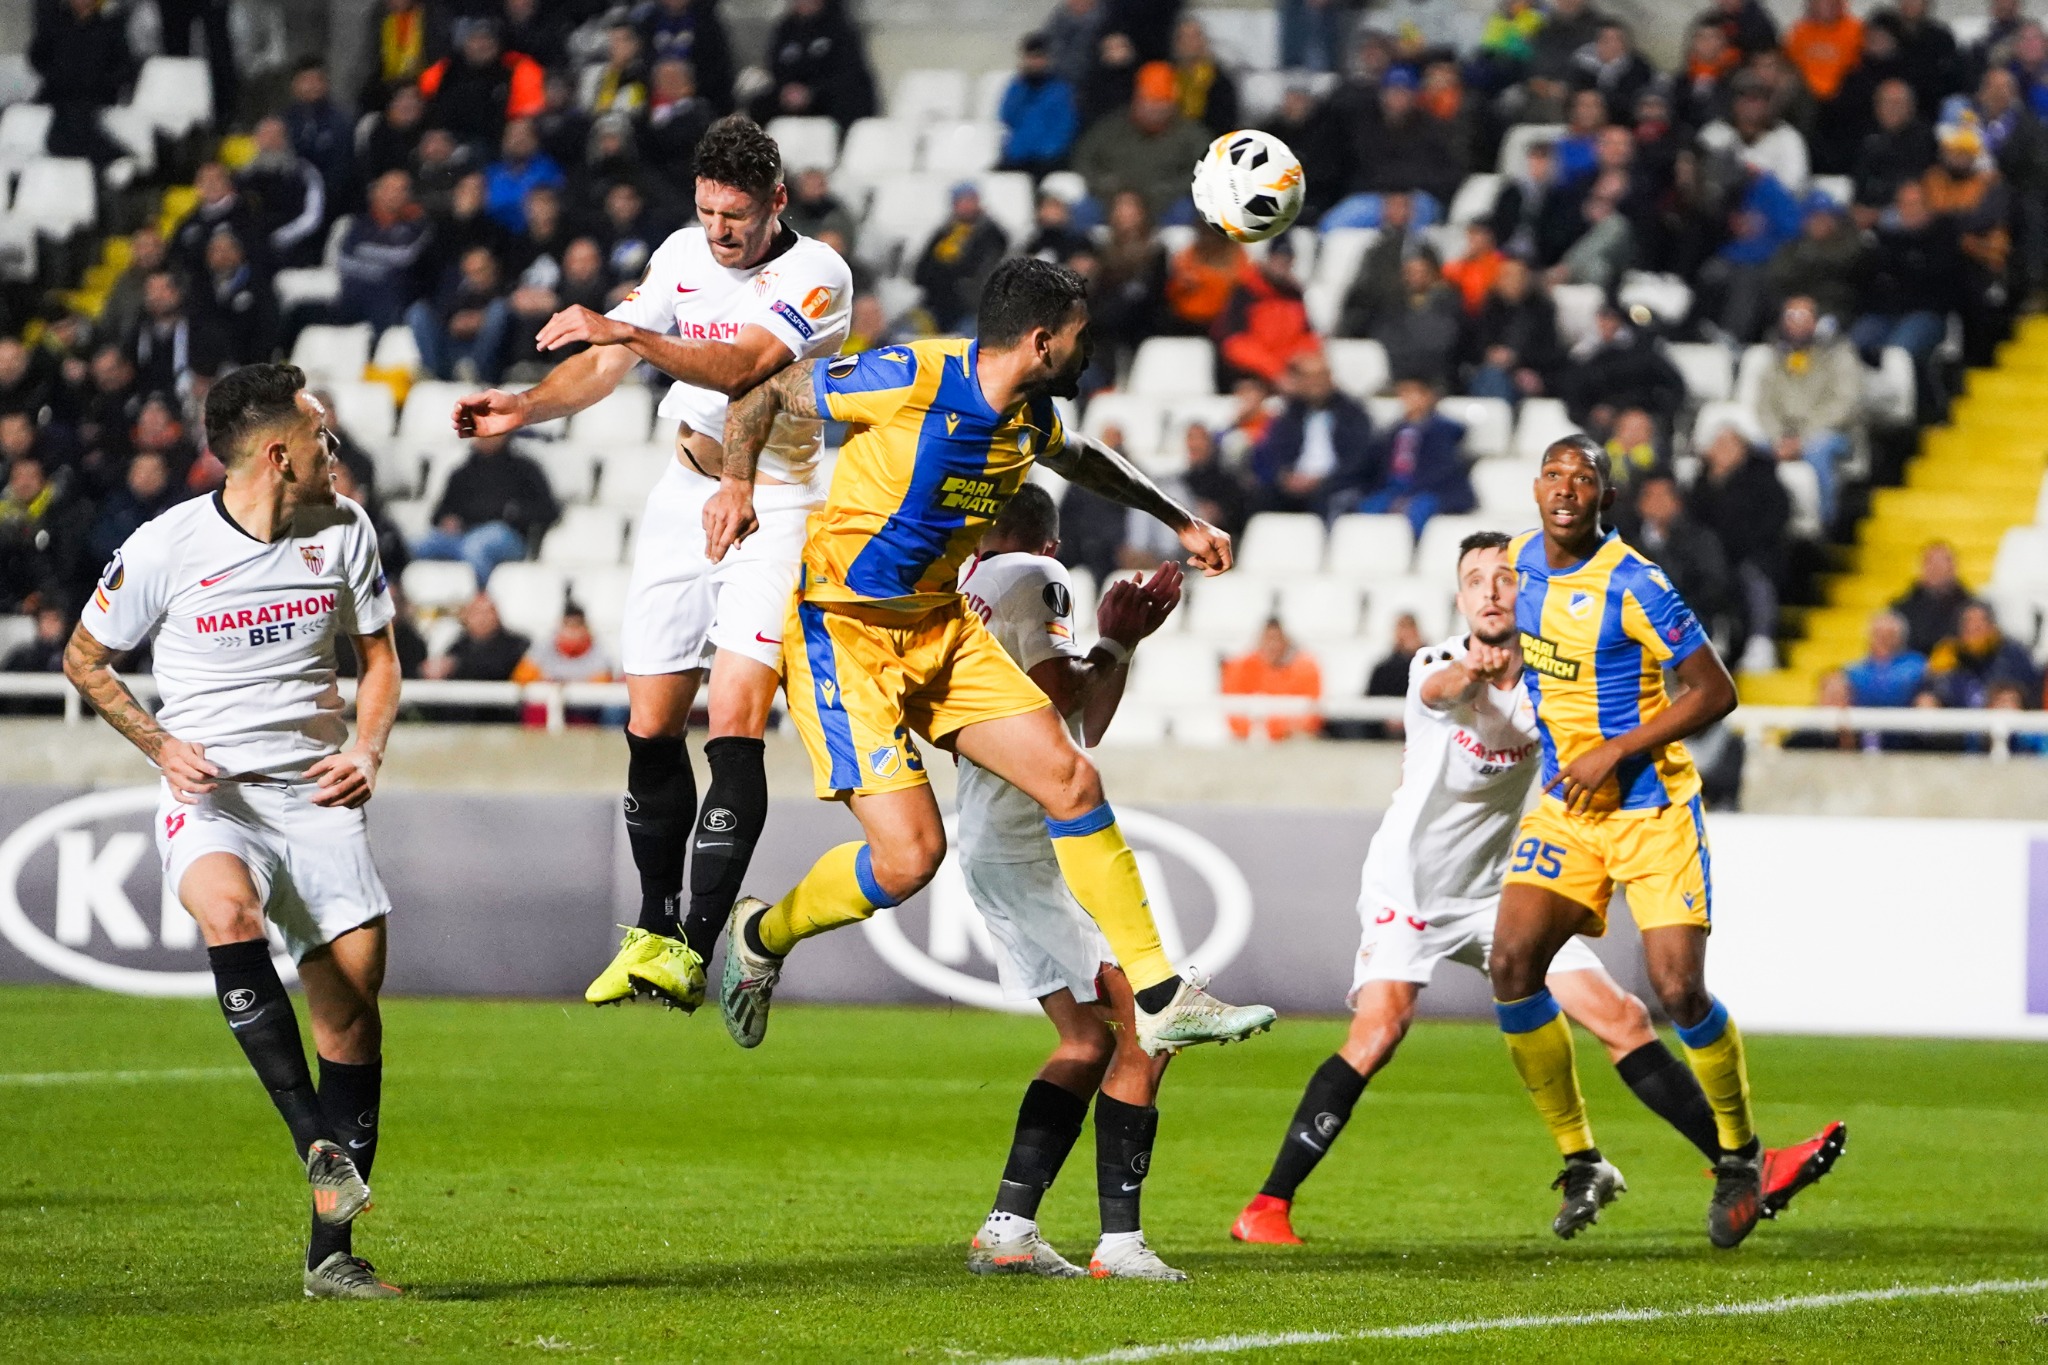 Image from the APOEL FC - Sevilla FC match